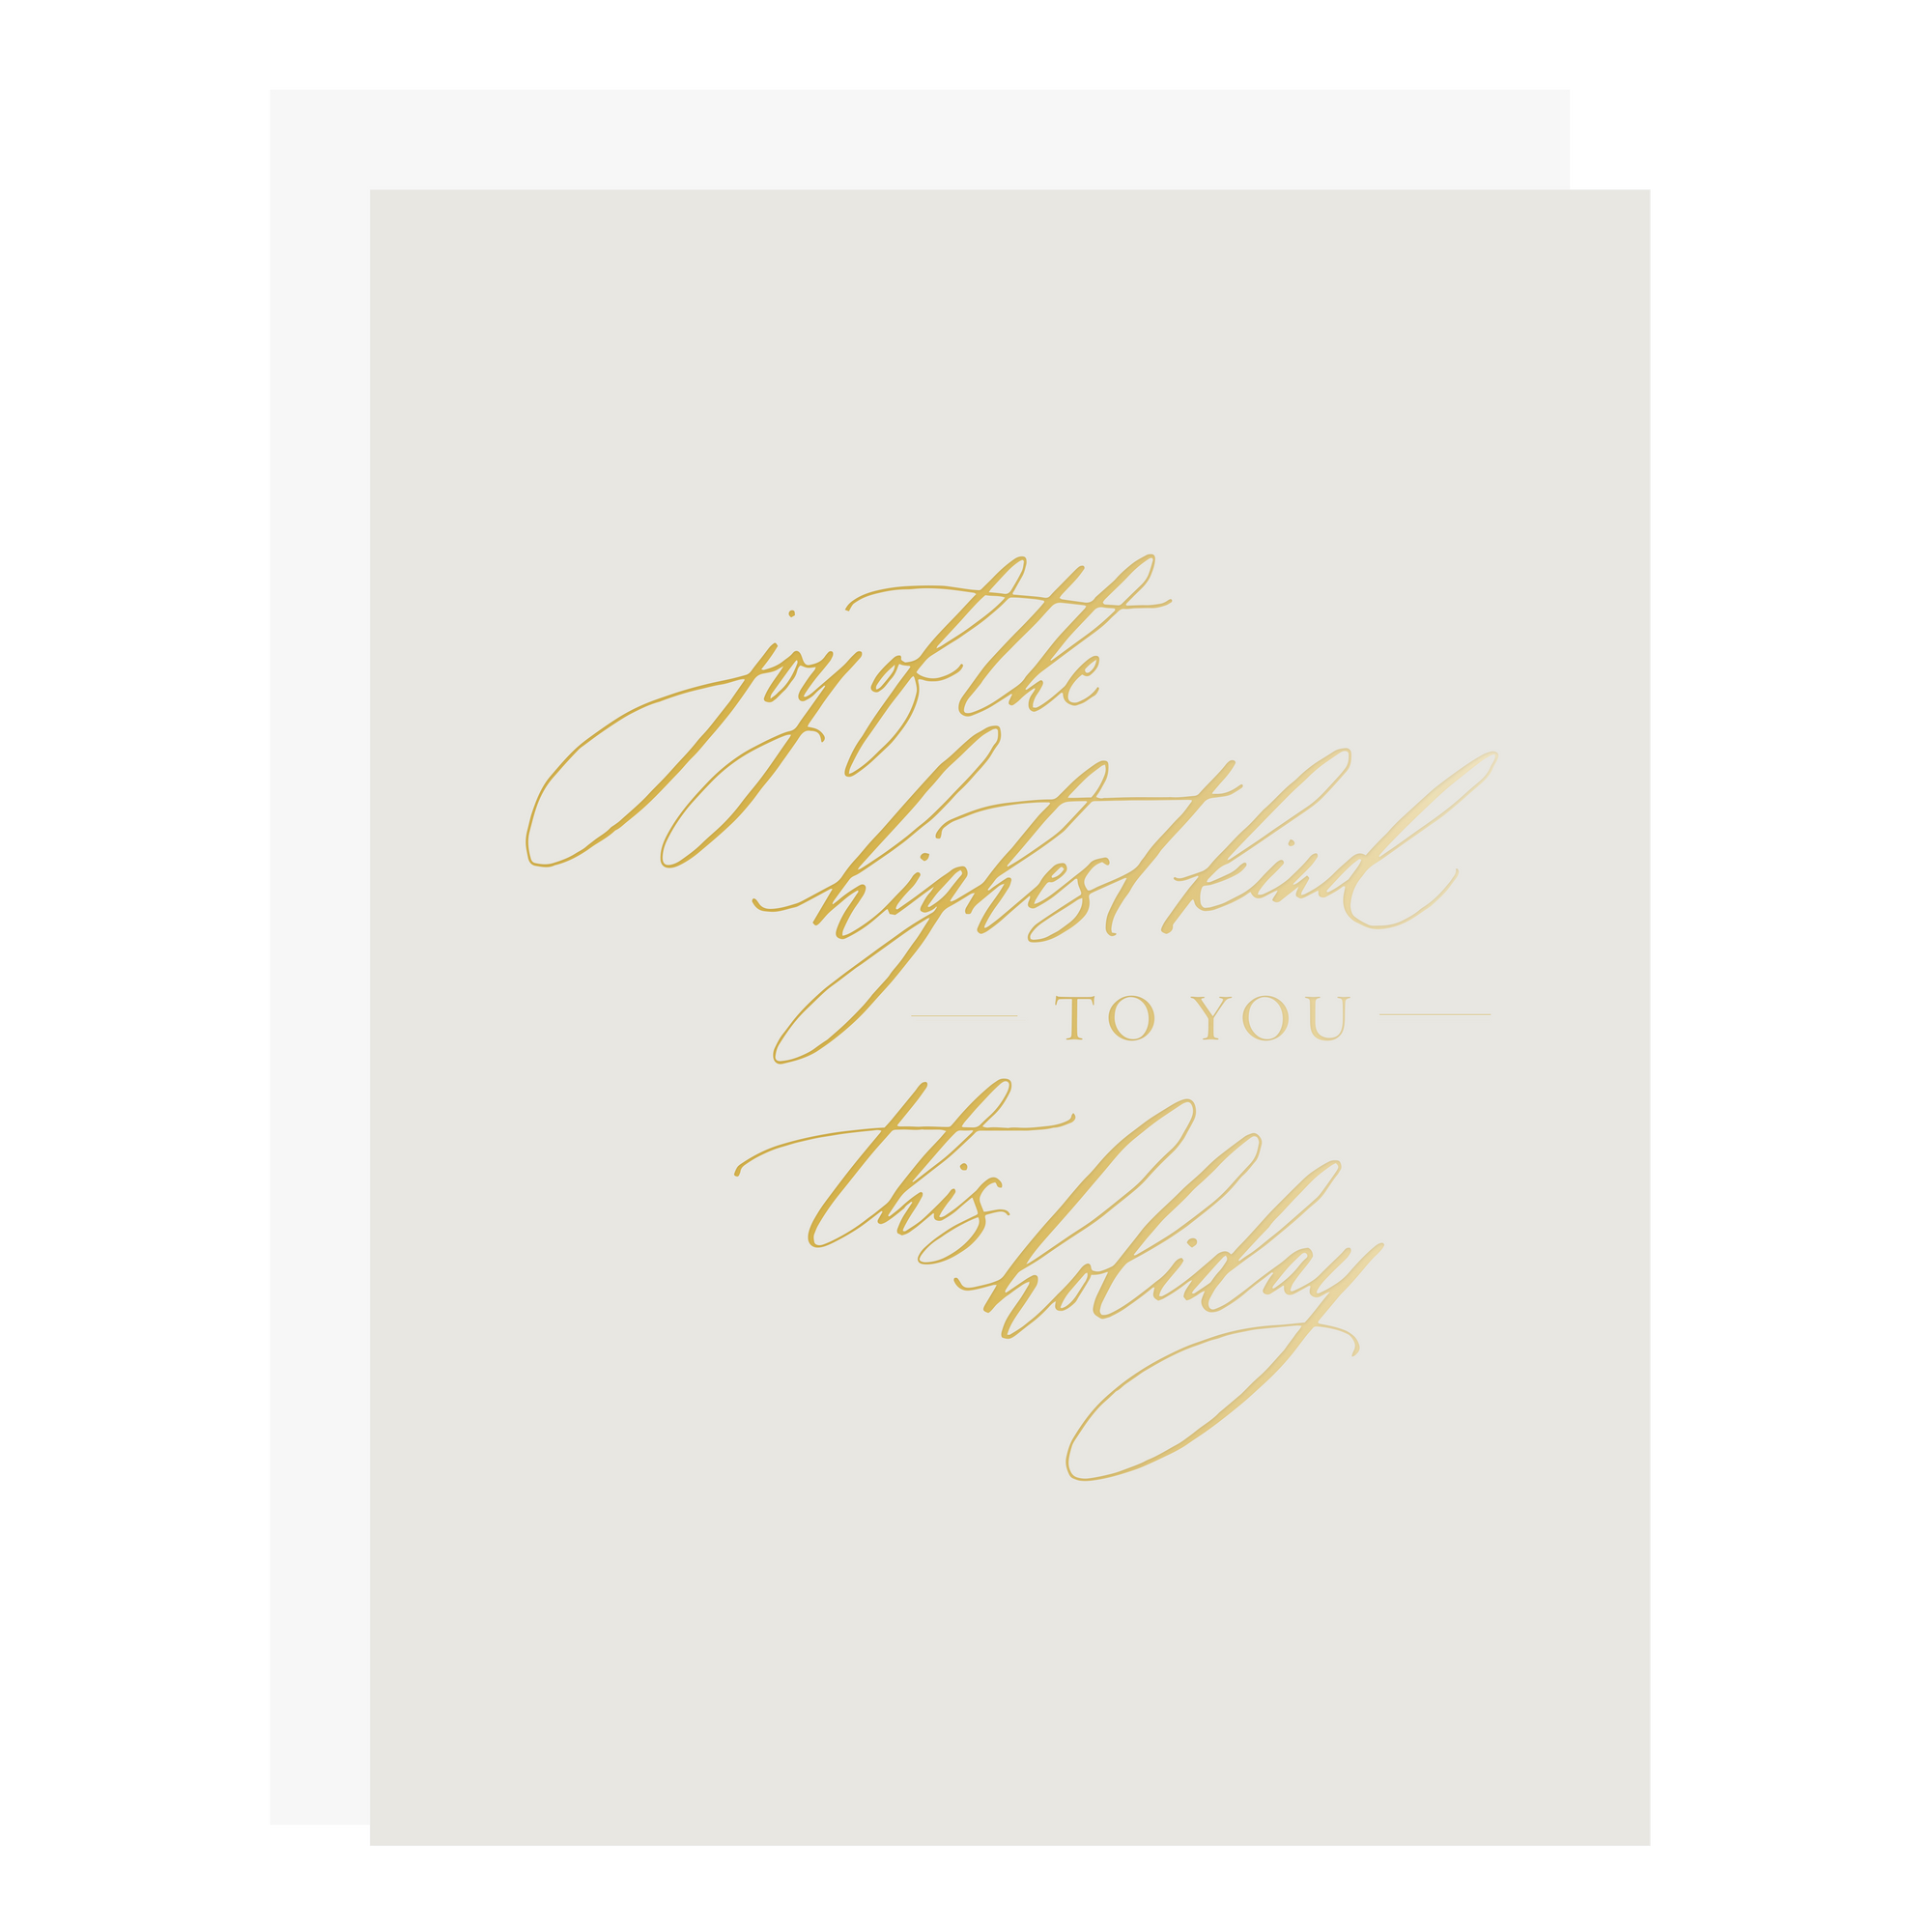 "Joy of the Highest Kind" card, letterpress printed by hand in gold foil. 